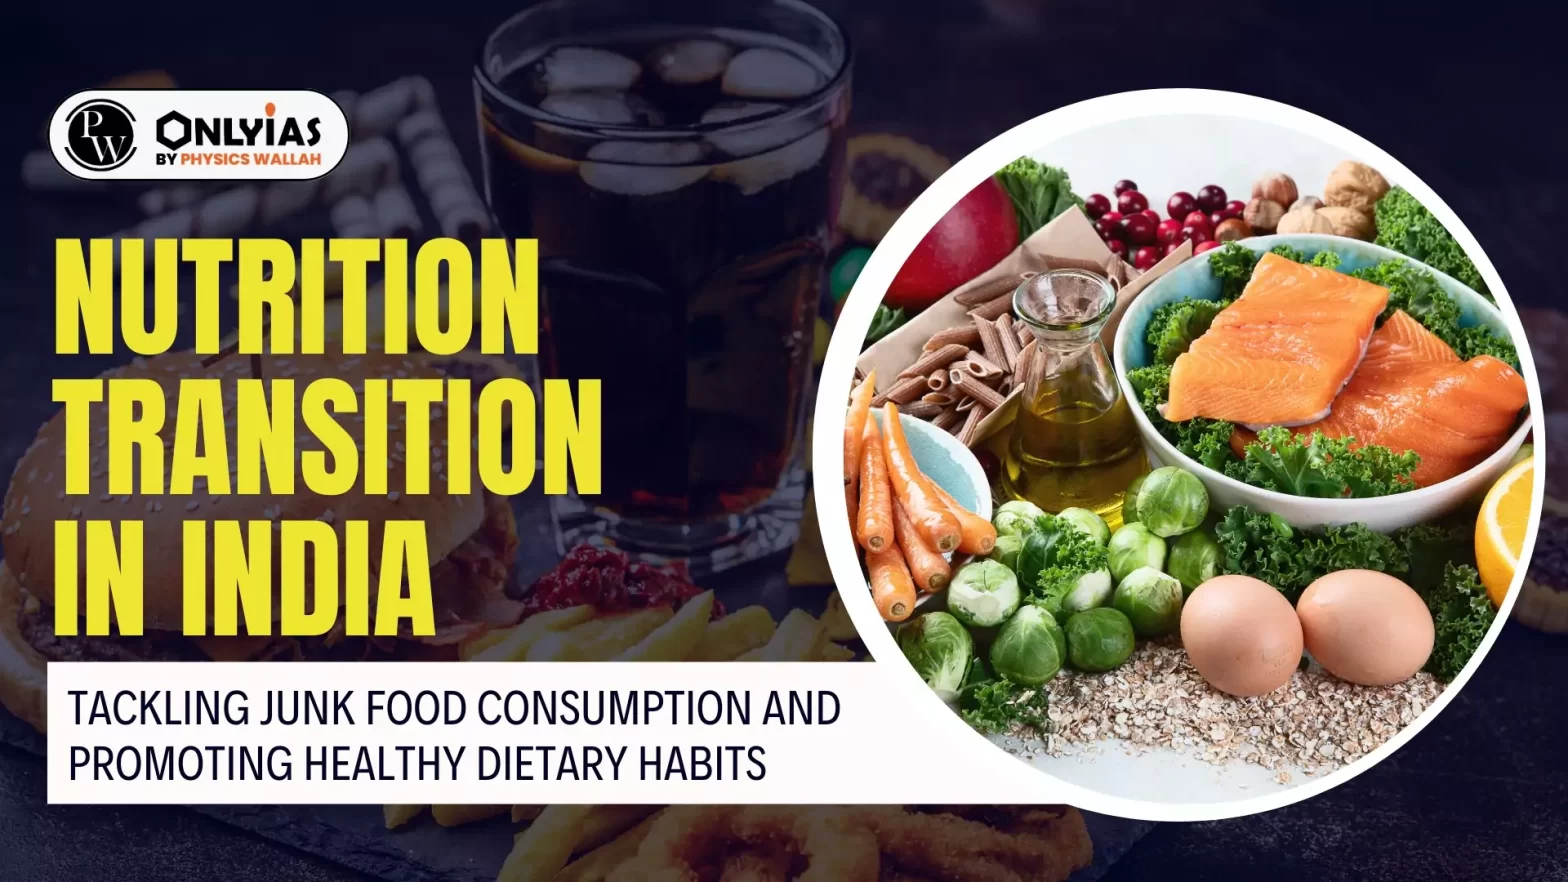 Nutrition Transition in India: Tackling Junk Food Consumption and Promoting Healthy Dietary Habits